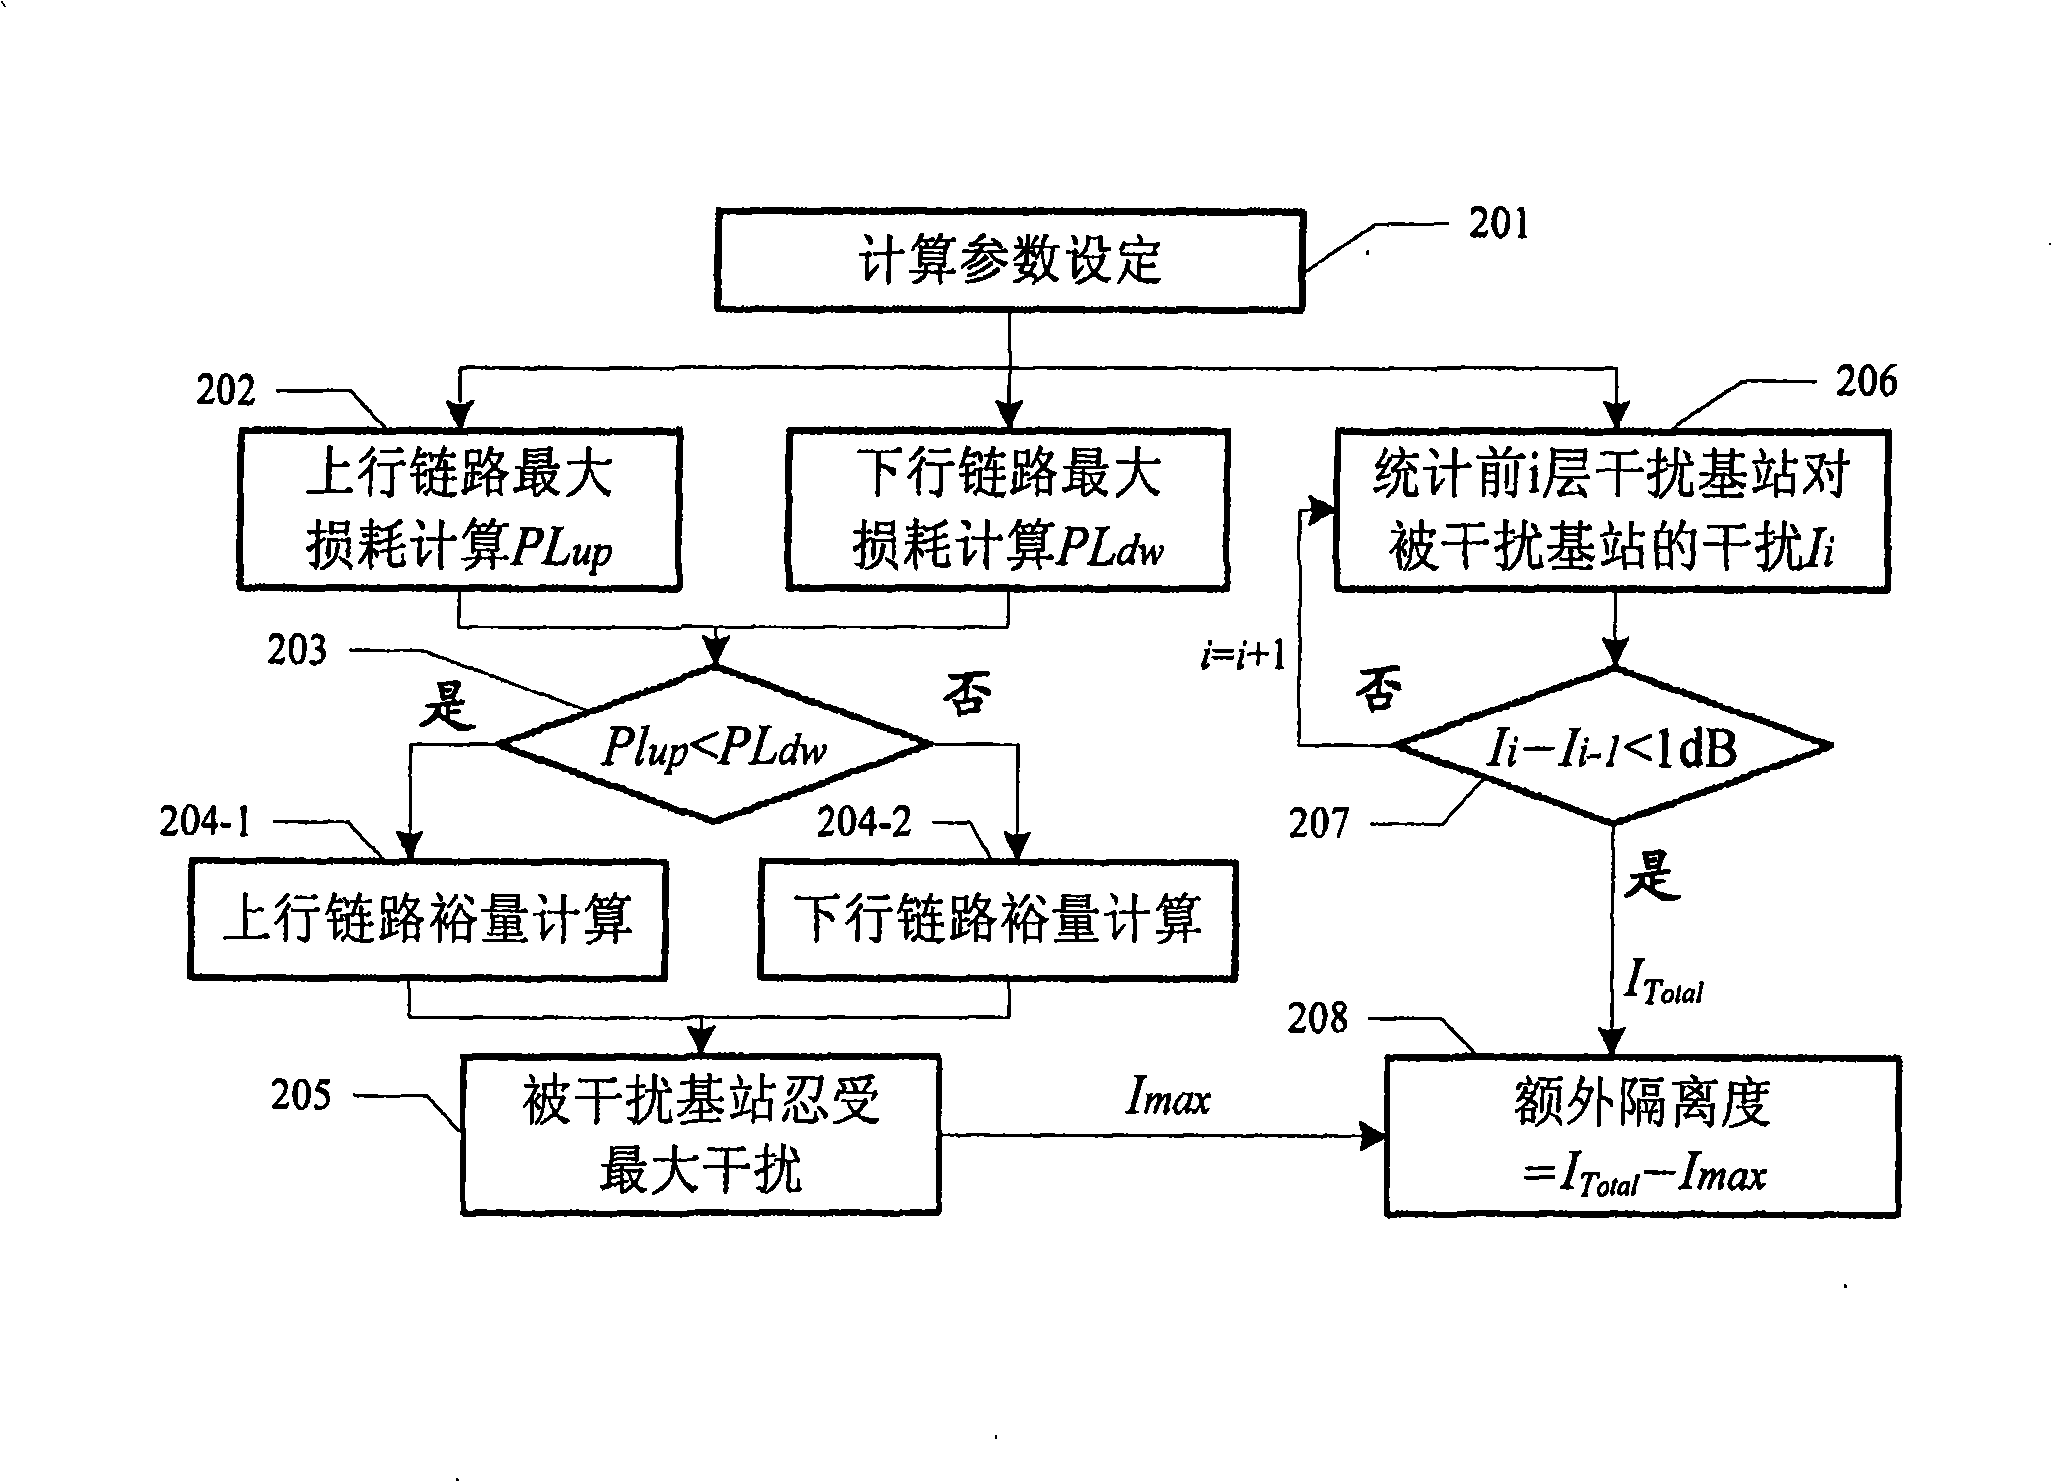 Method and system for confirming interference between base stations of mobile communication system